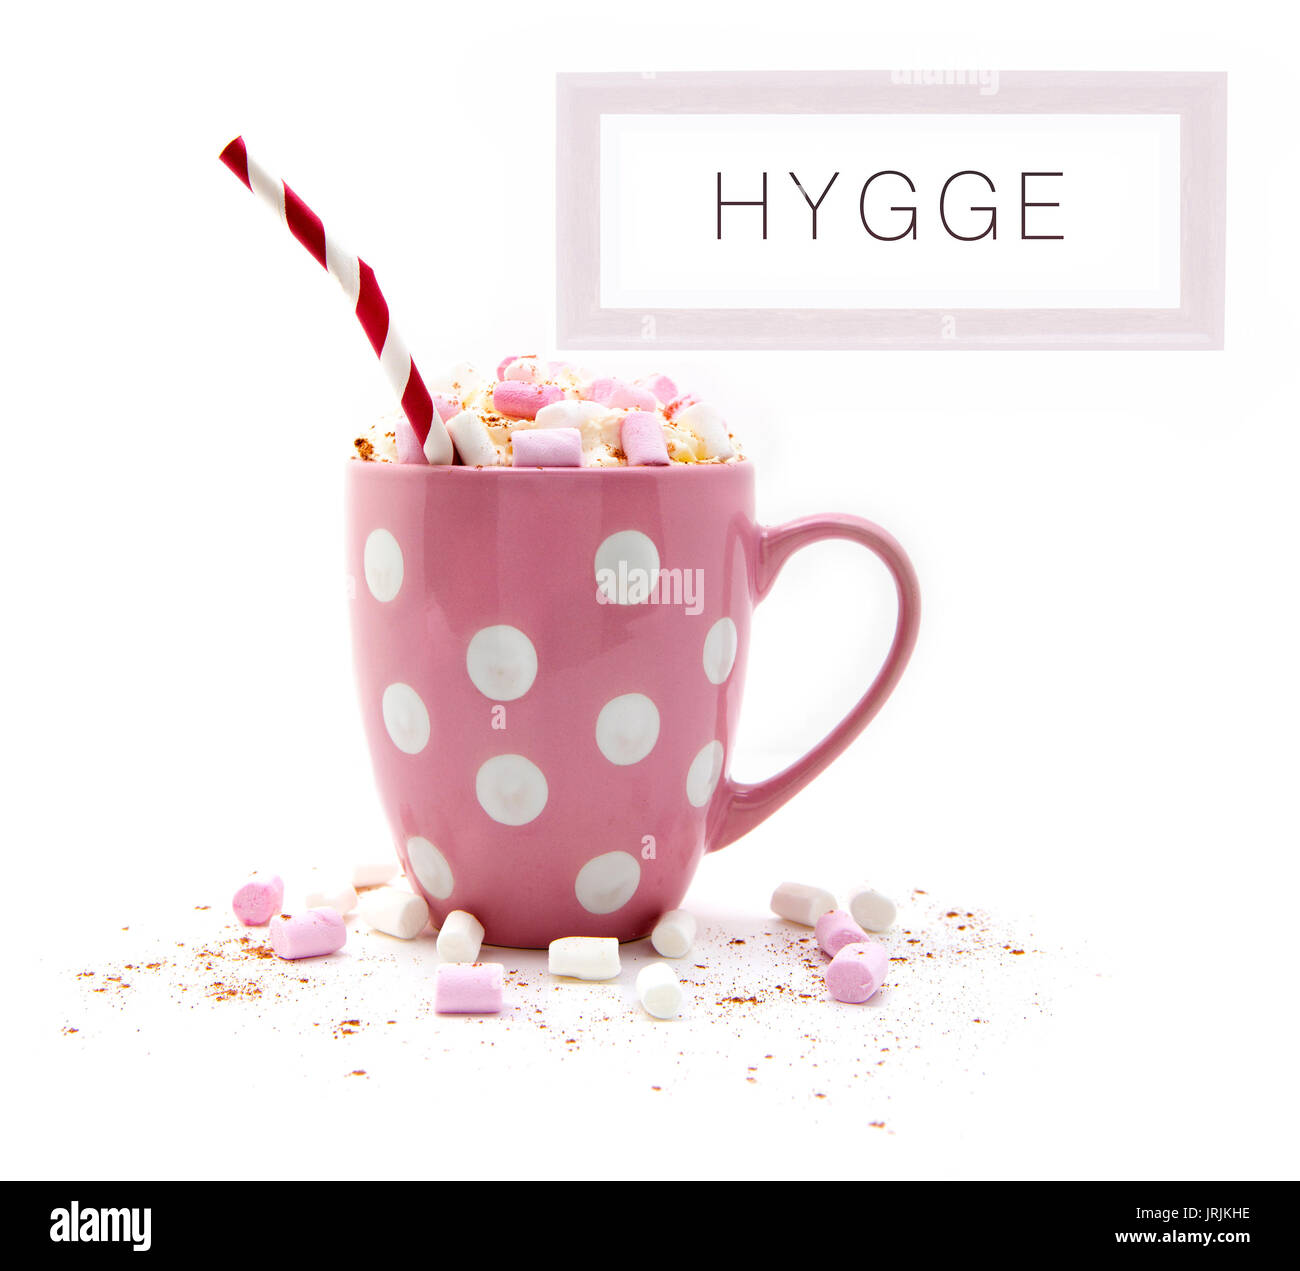 Hot Chocolate in a pink mug with marshmallows a red white striped straw and a picture of Hygge on a white background Stock Photo